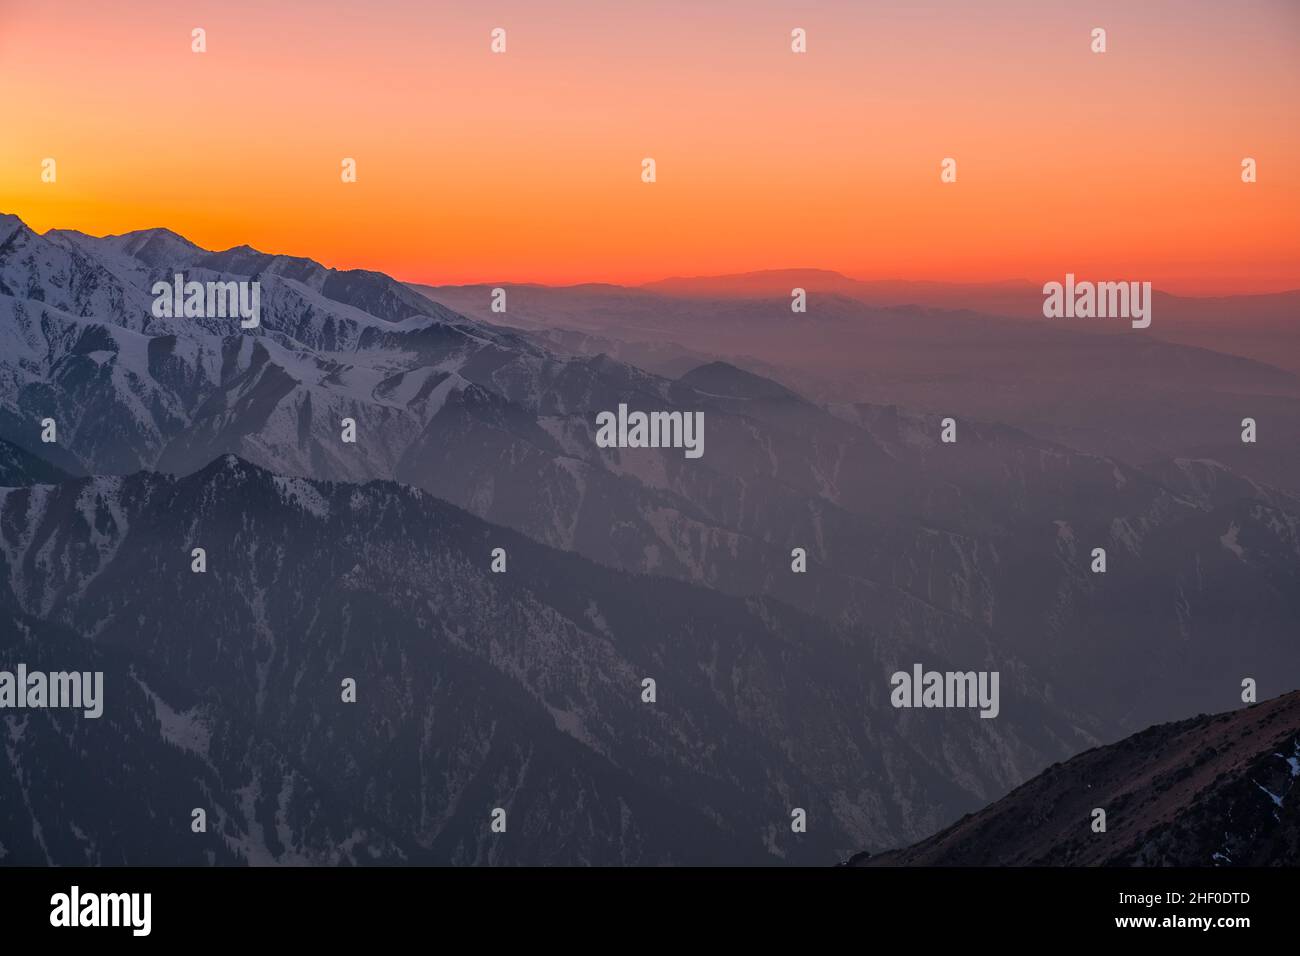 Magical atmosphere of a sunset in the highlands; sunset sky over snow-capped mountain ridges Stock Photo